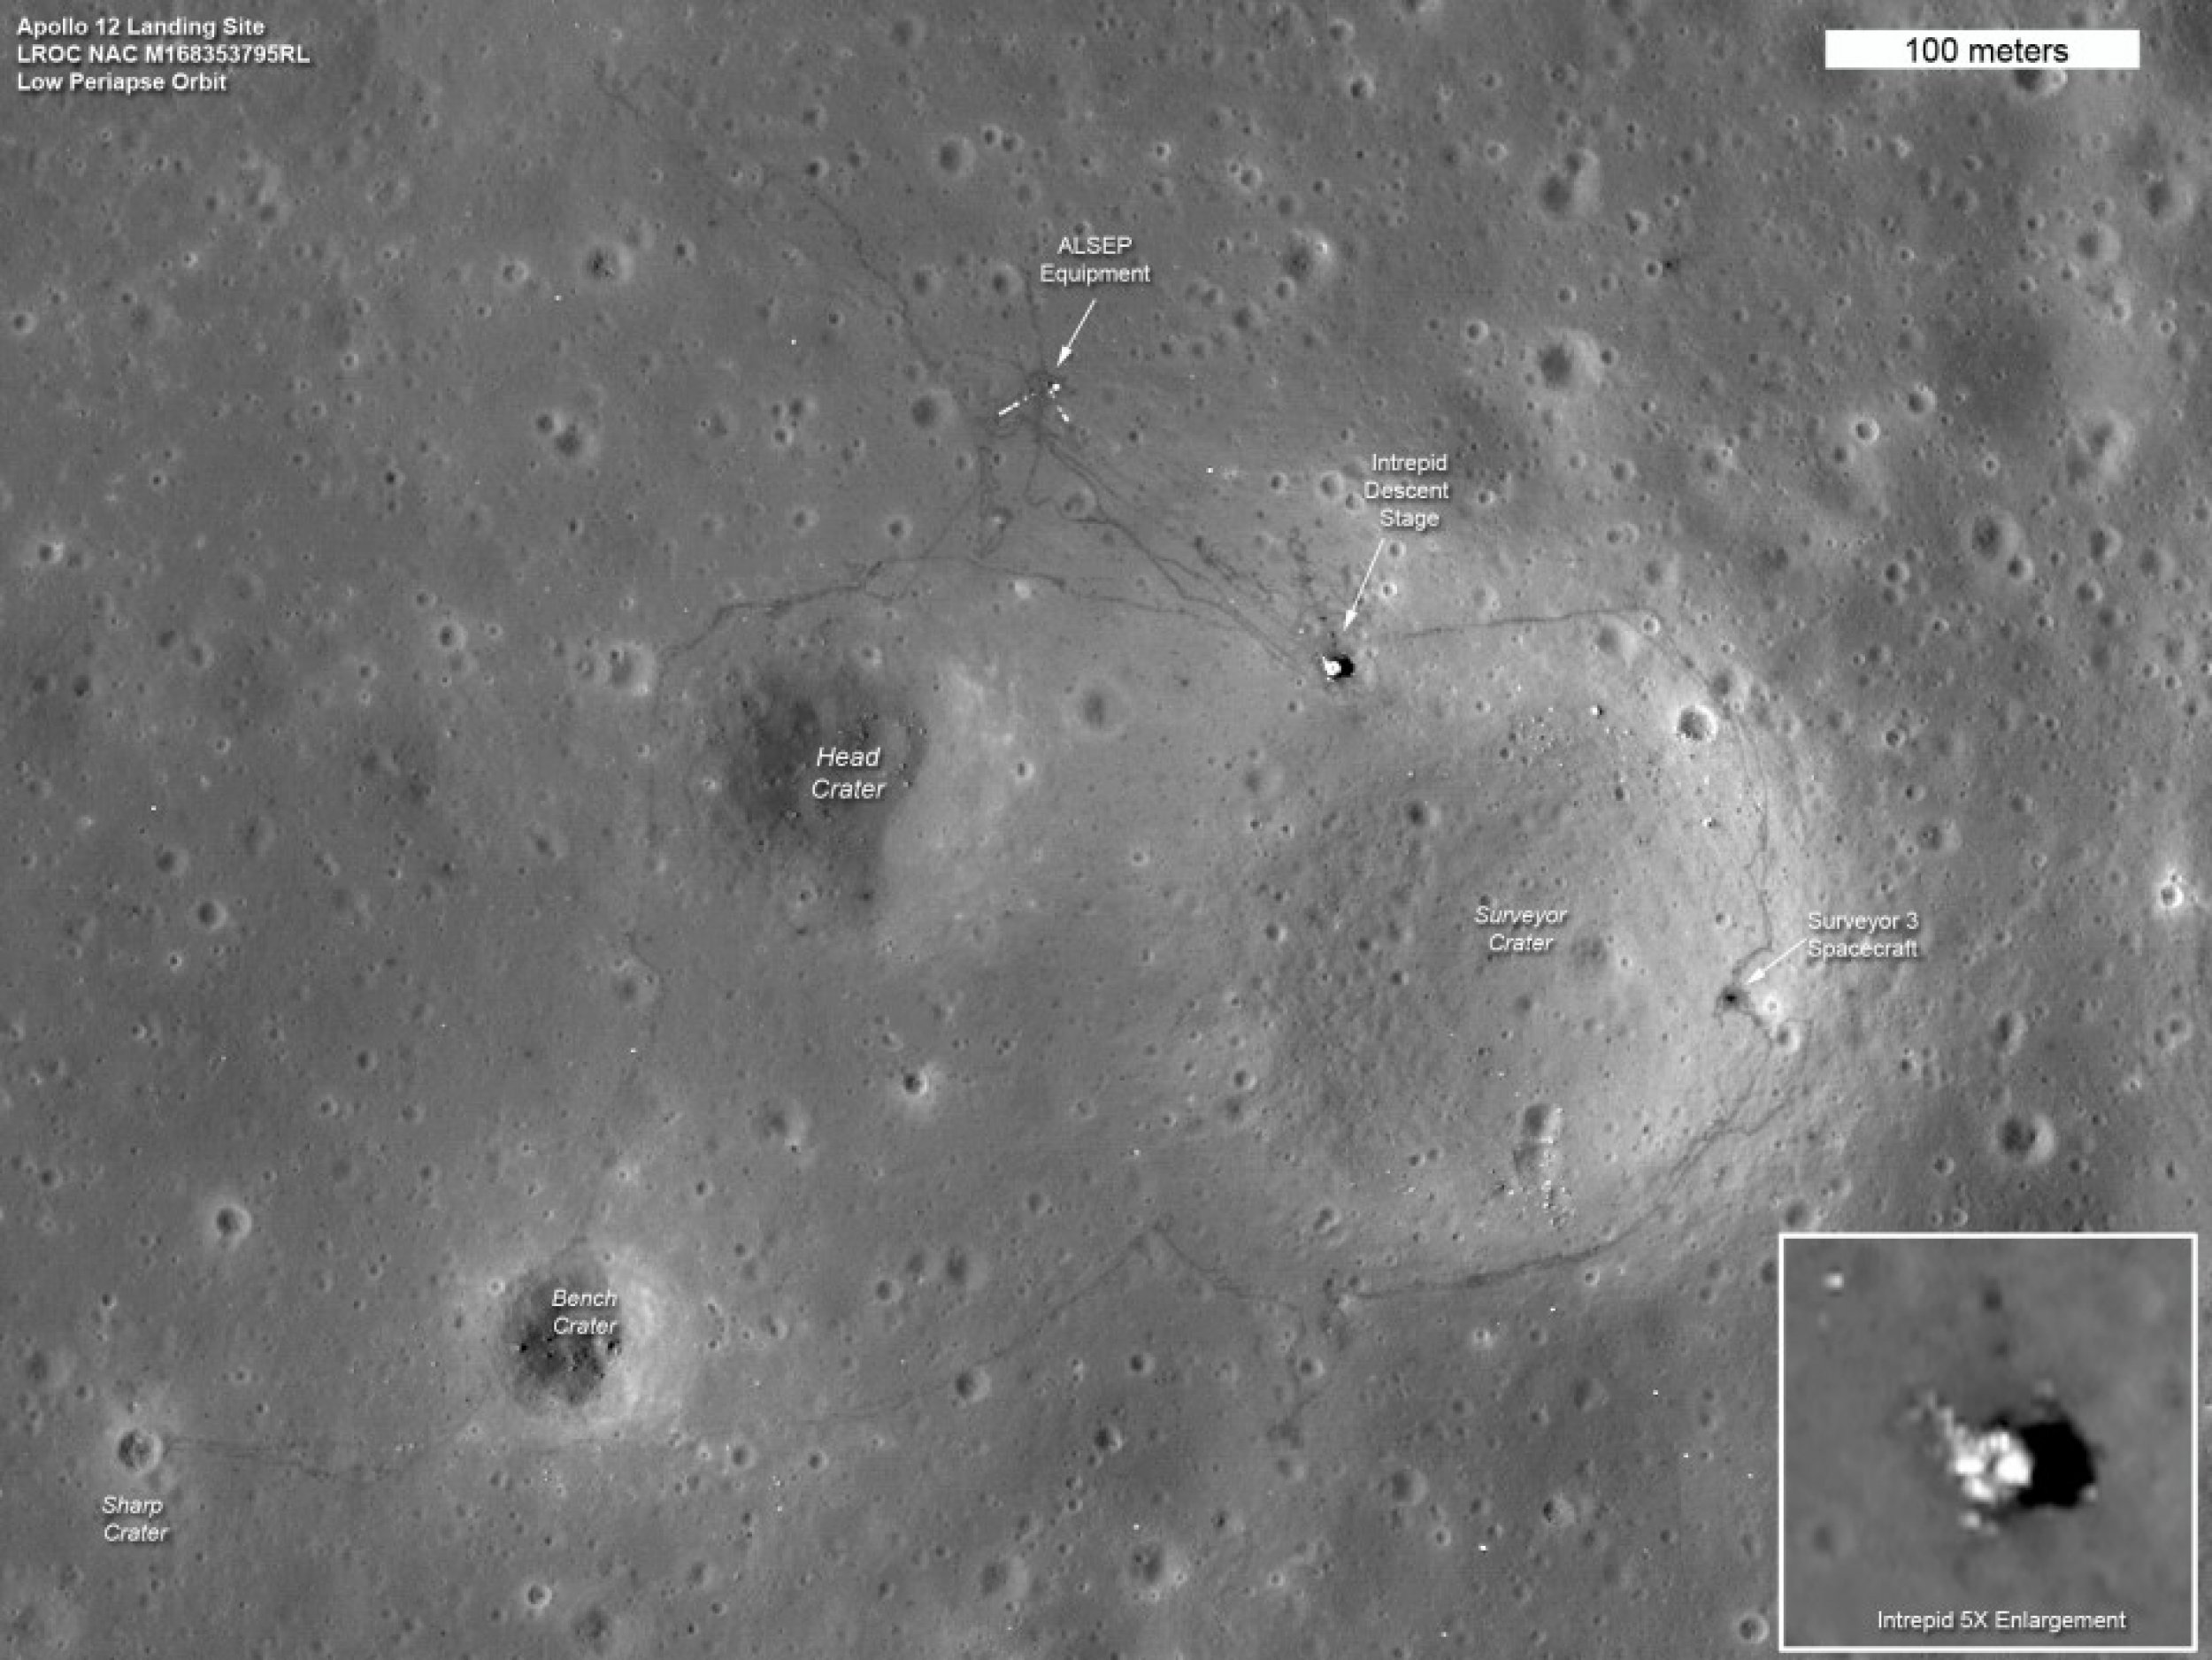 The tracks made in 1969 by astronauts Pete Conrad and Alan Bean, the third and fourth humans to walk on the moon, can be seen in this LRO image of the Apollo 12 site.